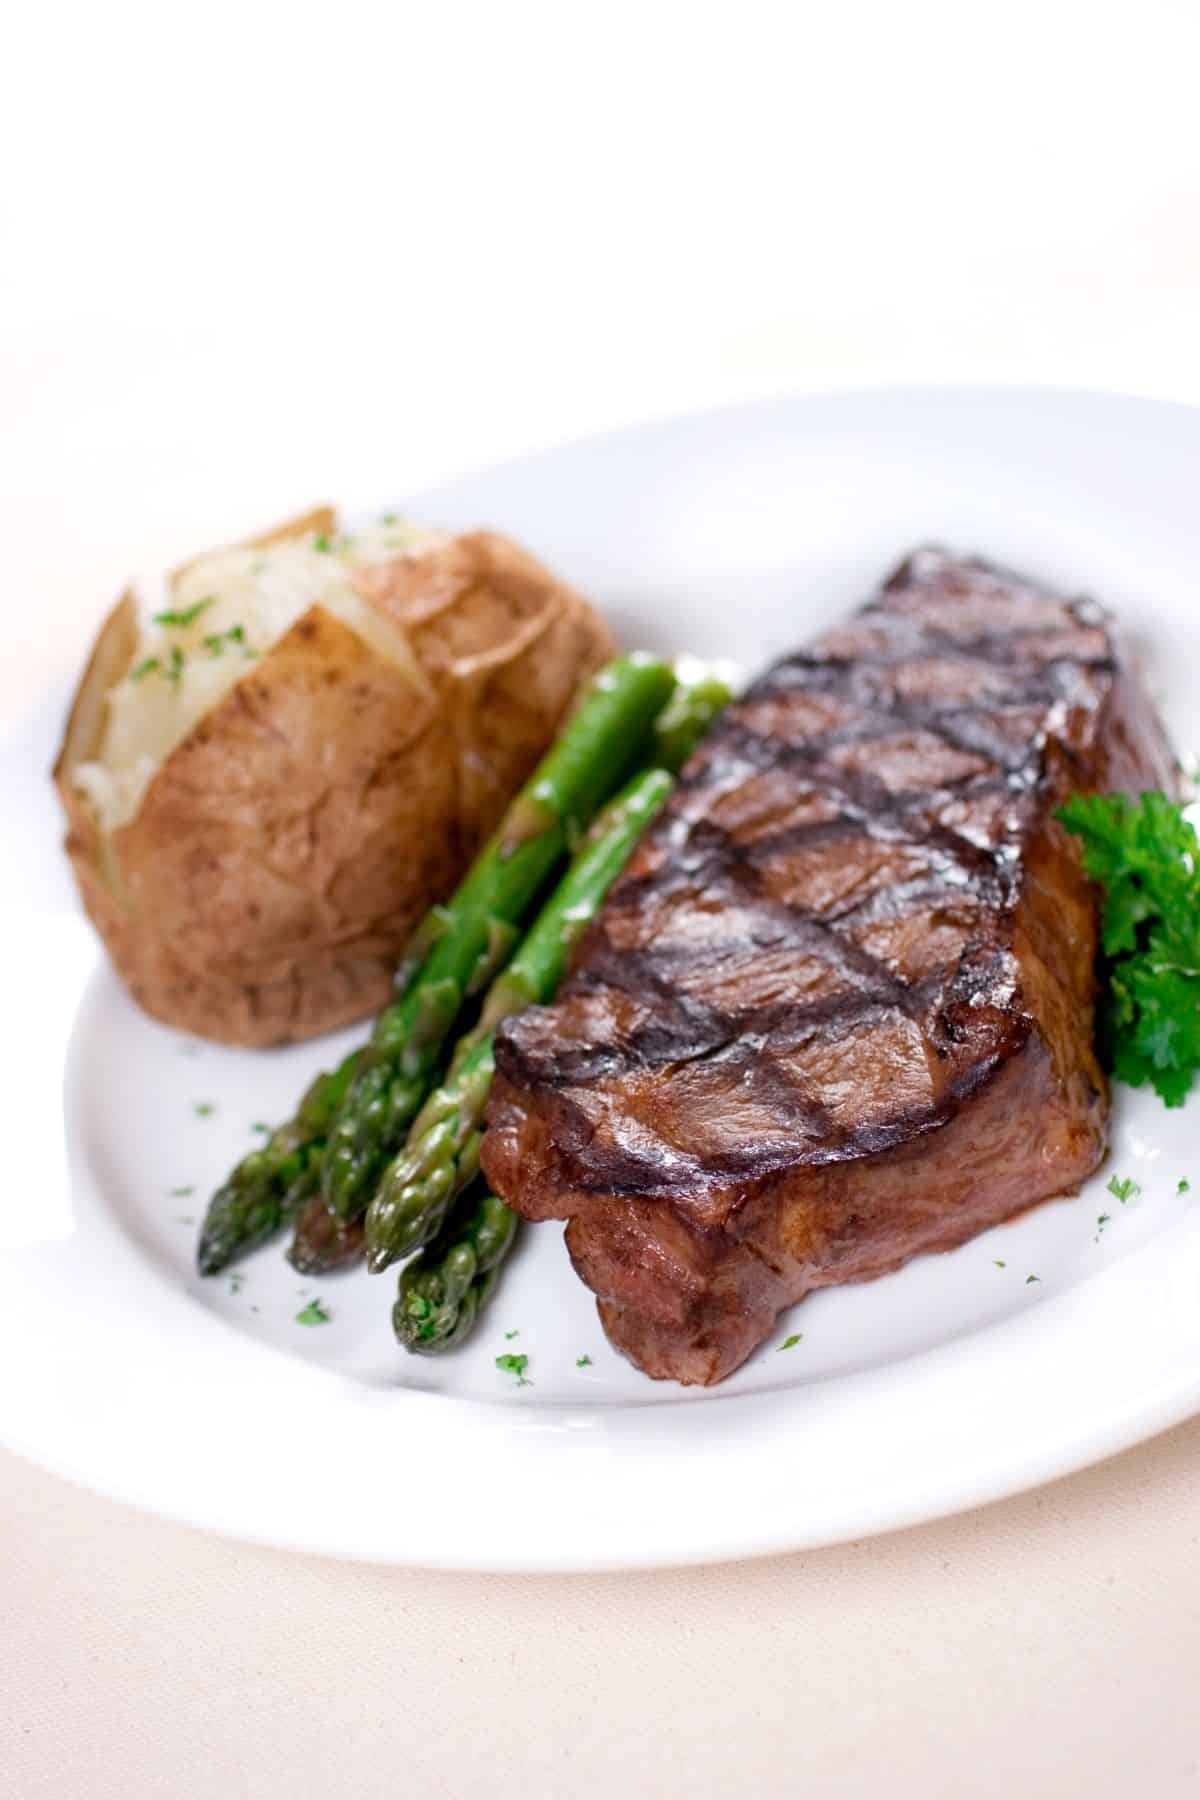 A plate of steak with a side of Baked potato and asparagus.